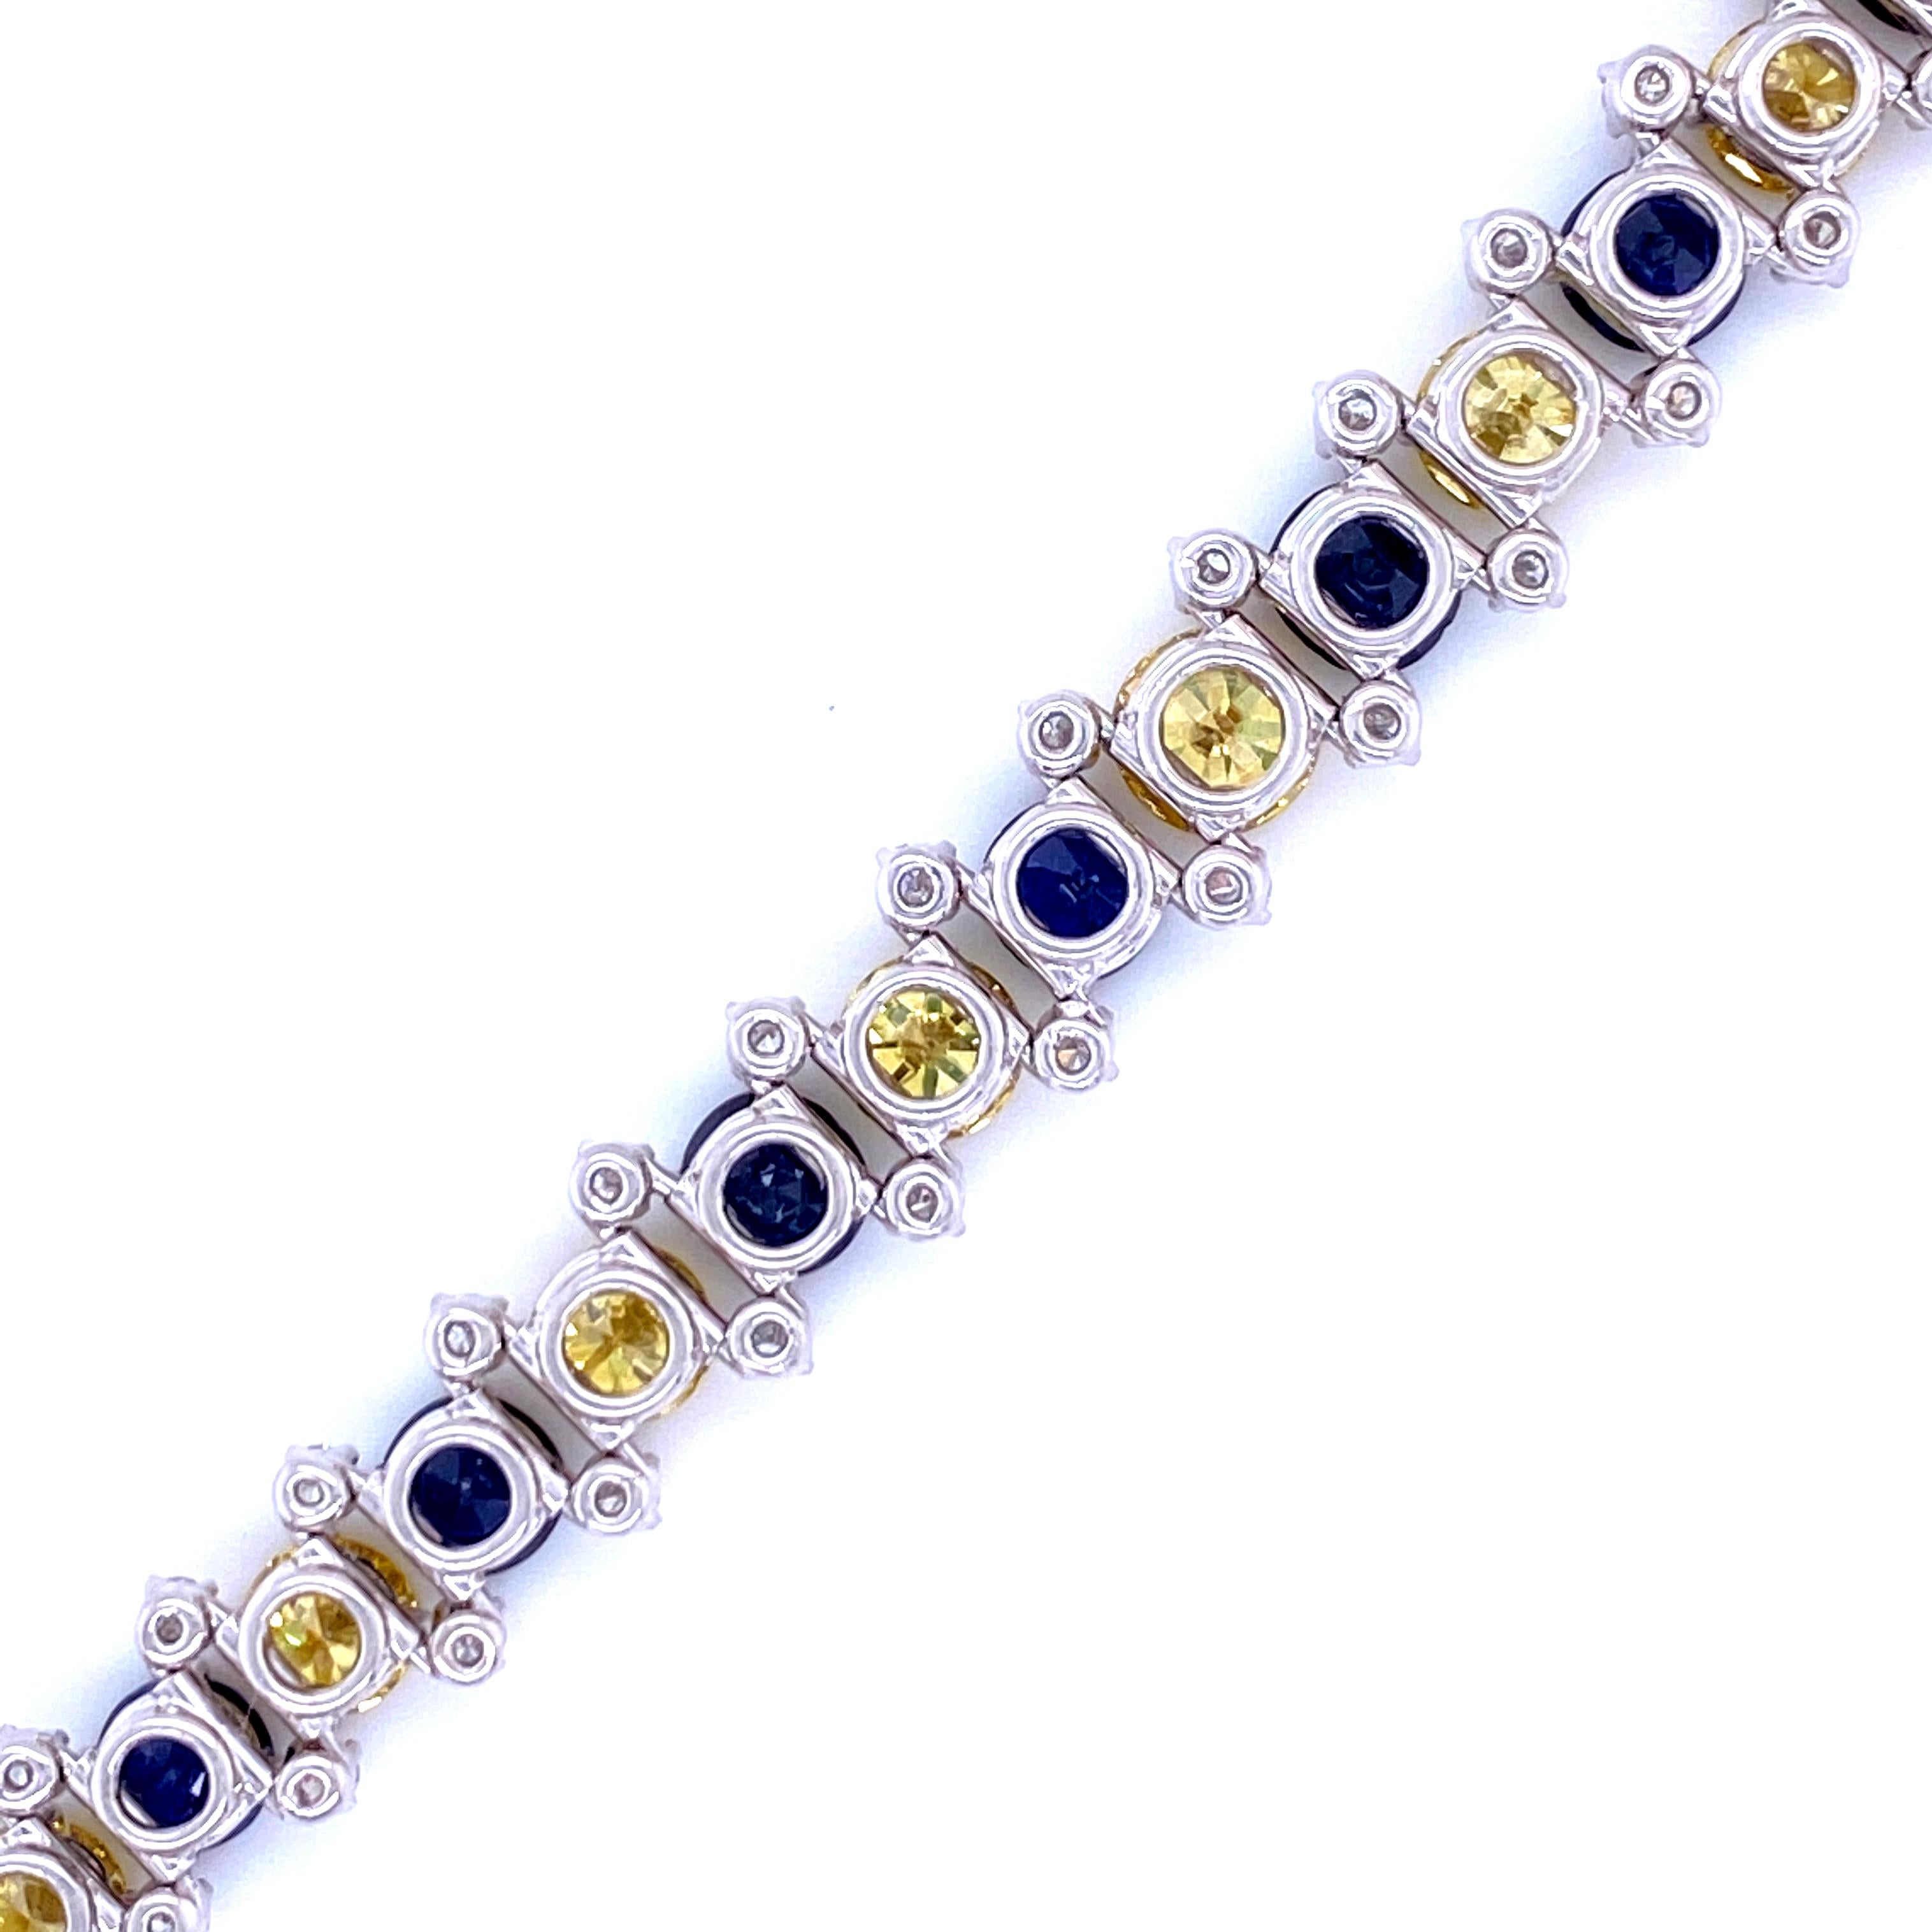 One platinum and 14 karat white gold bracelet prong set with unheated Burma sapphires approximately 7.61 carats total weight with fancy yellow diamonds approximately 6.93 carats total weight.  The bracelet measures 7 inches long and 9.5mm wide and